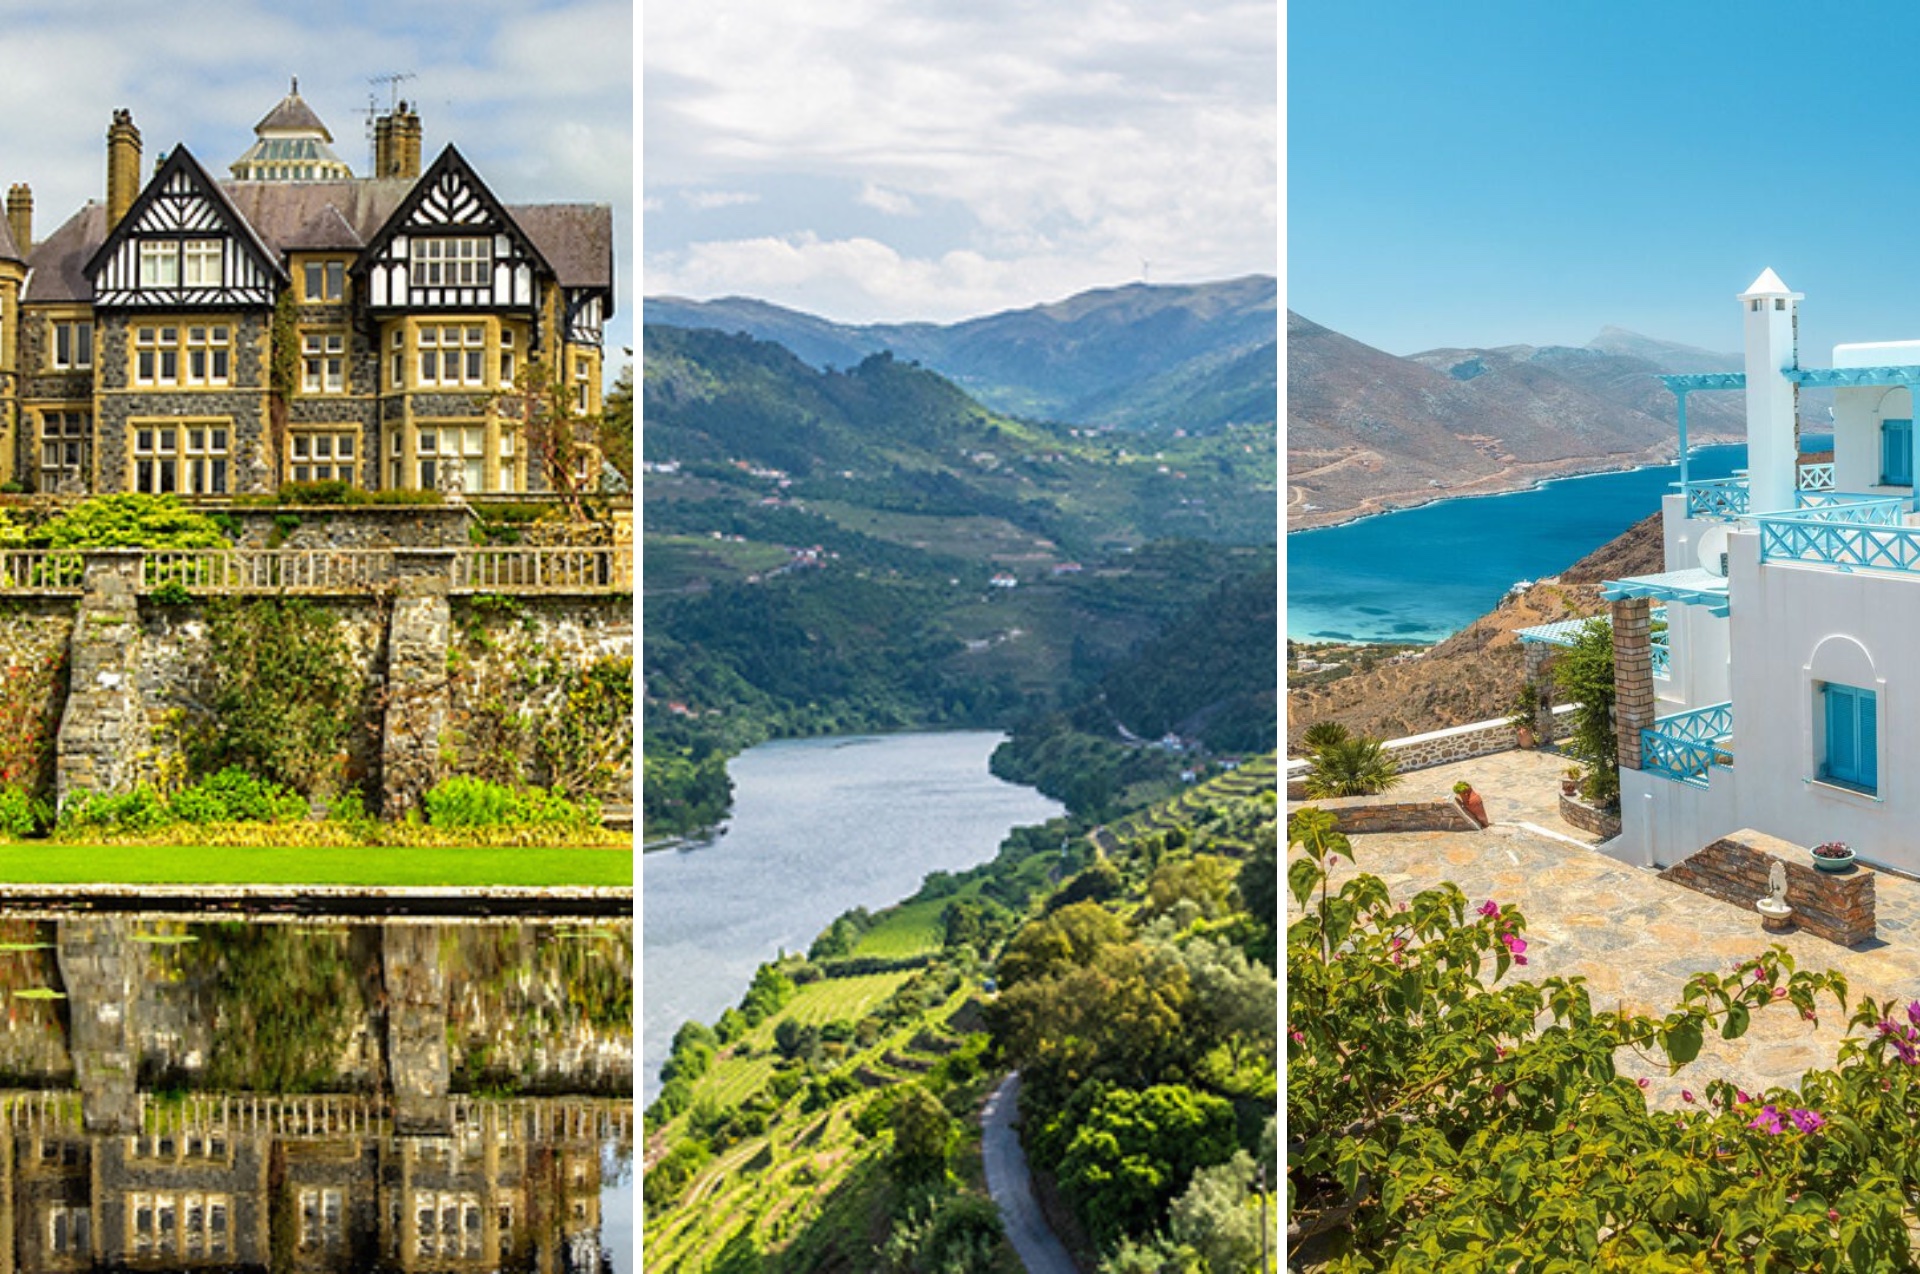 A collage of beautiful travel destinations. A verdant manor house, a fjord, and a white building near a bright blue body of water.